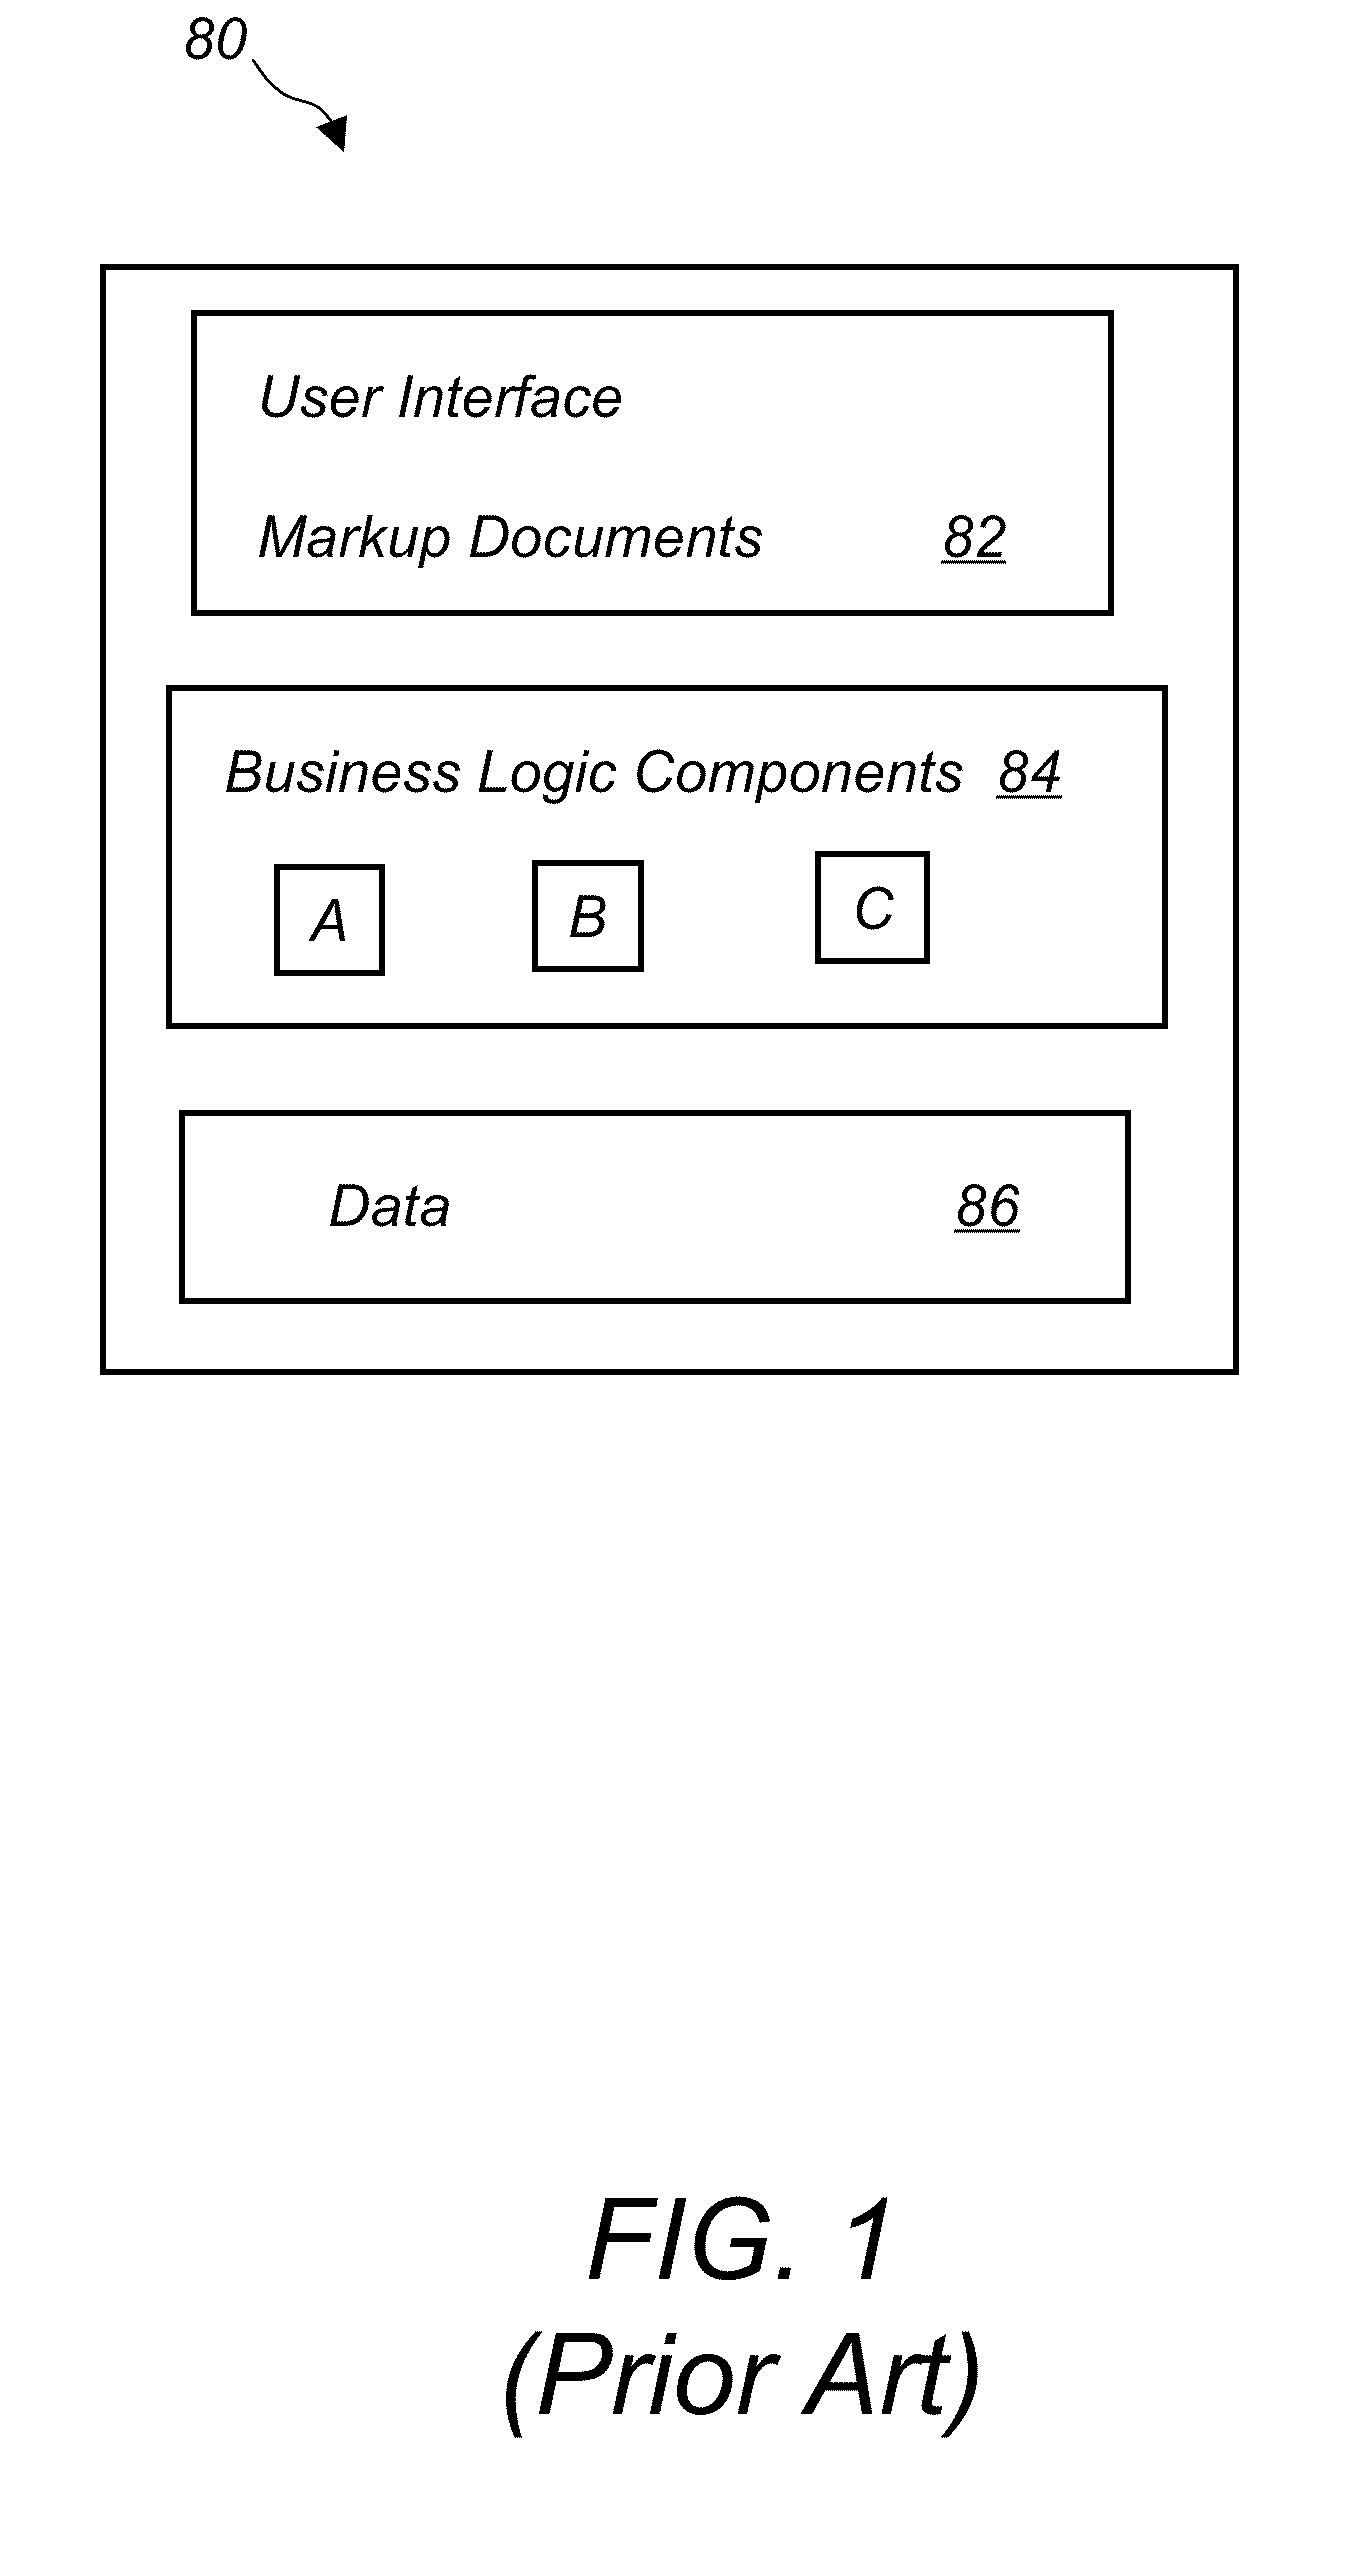 System and method for developing and deploying computer applications over a network